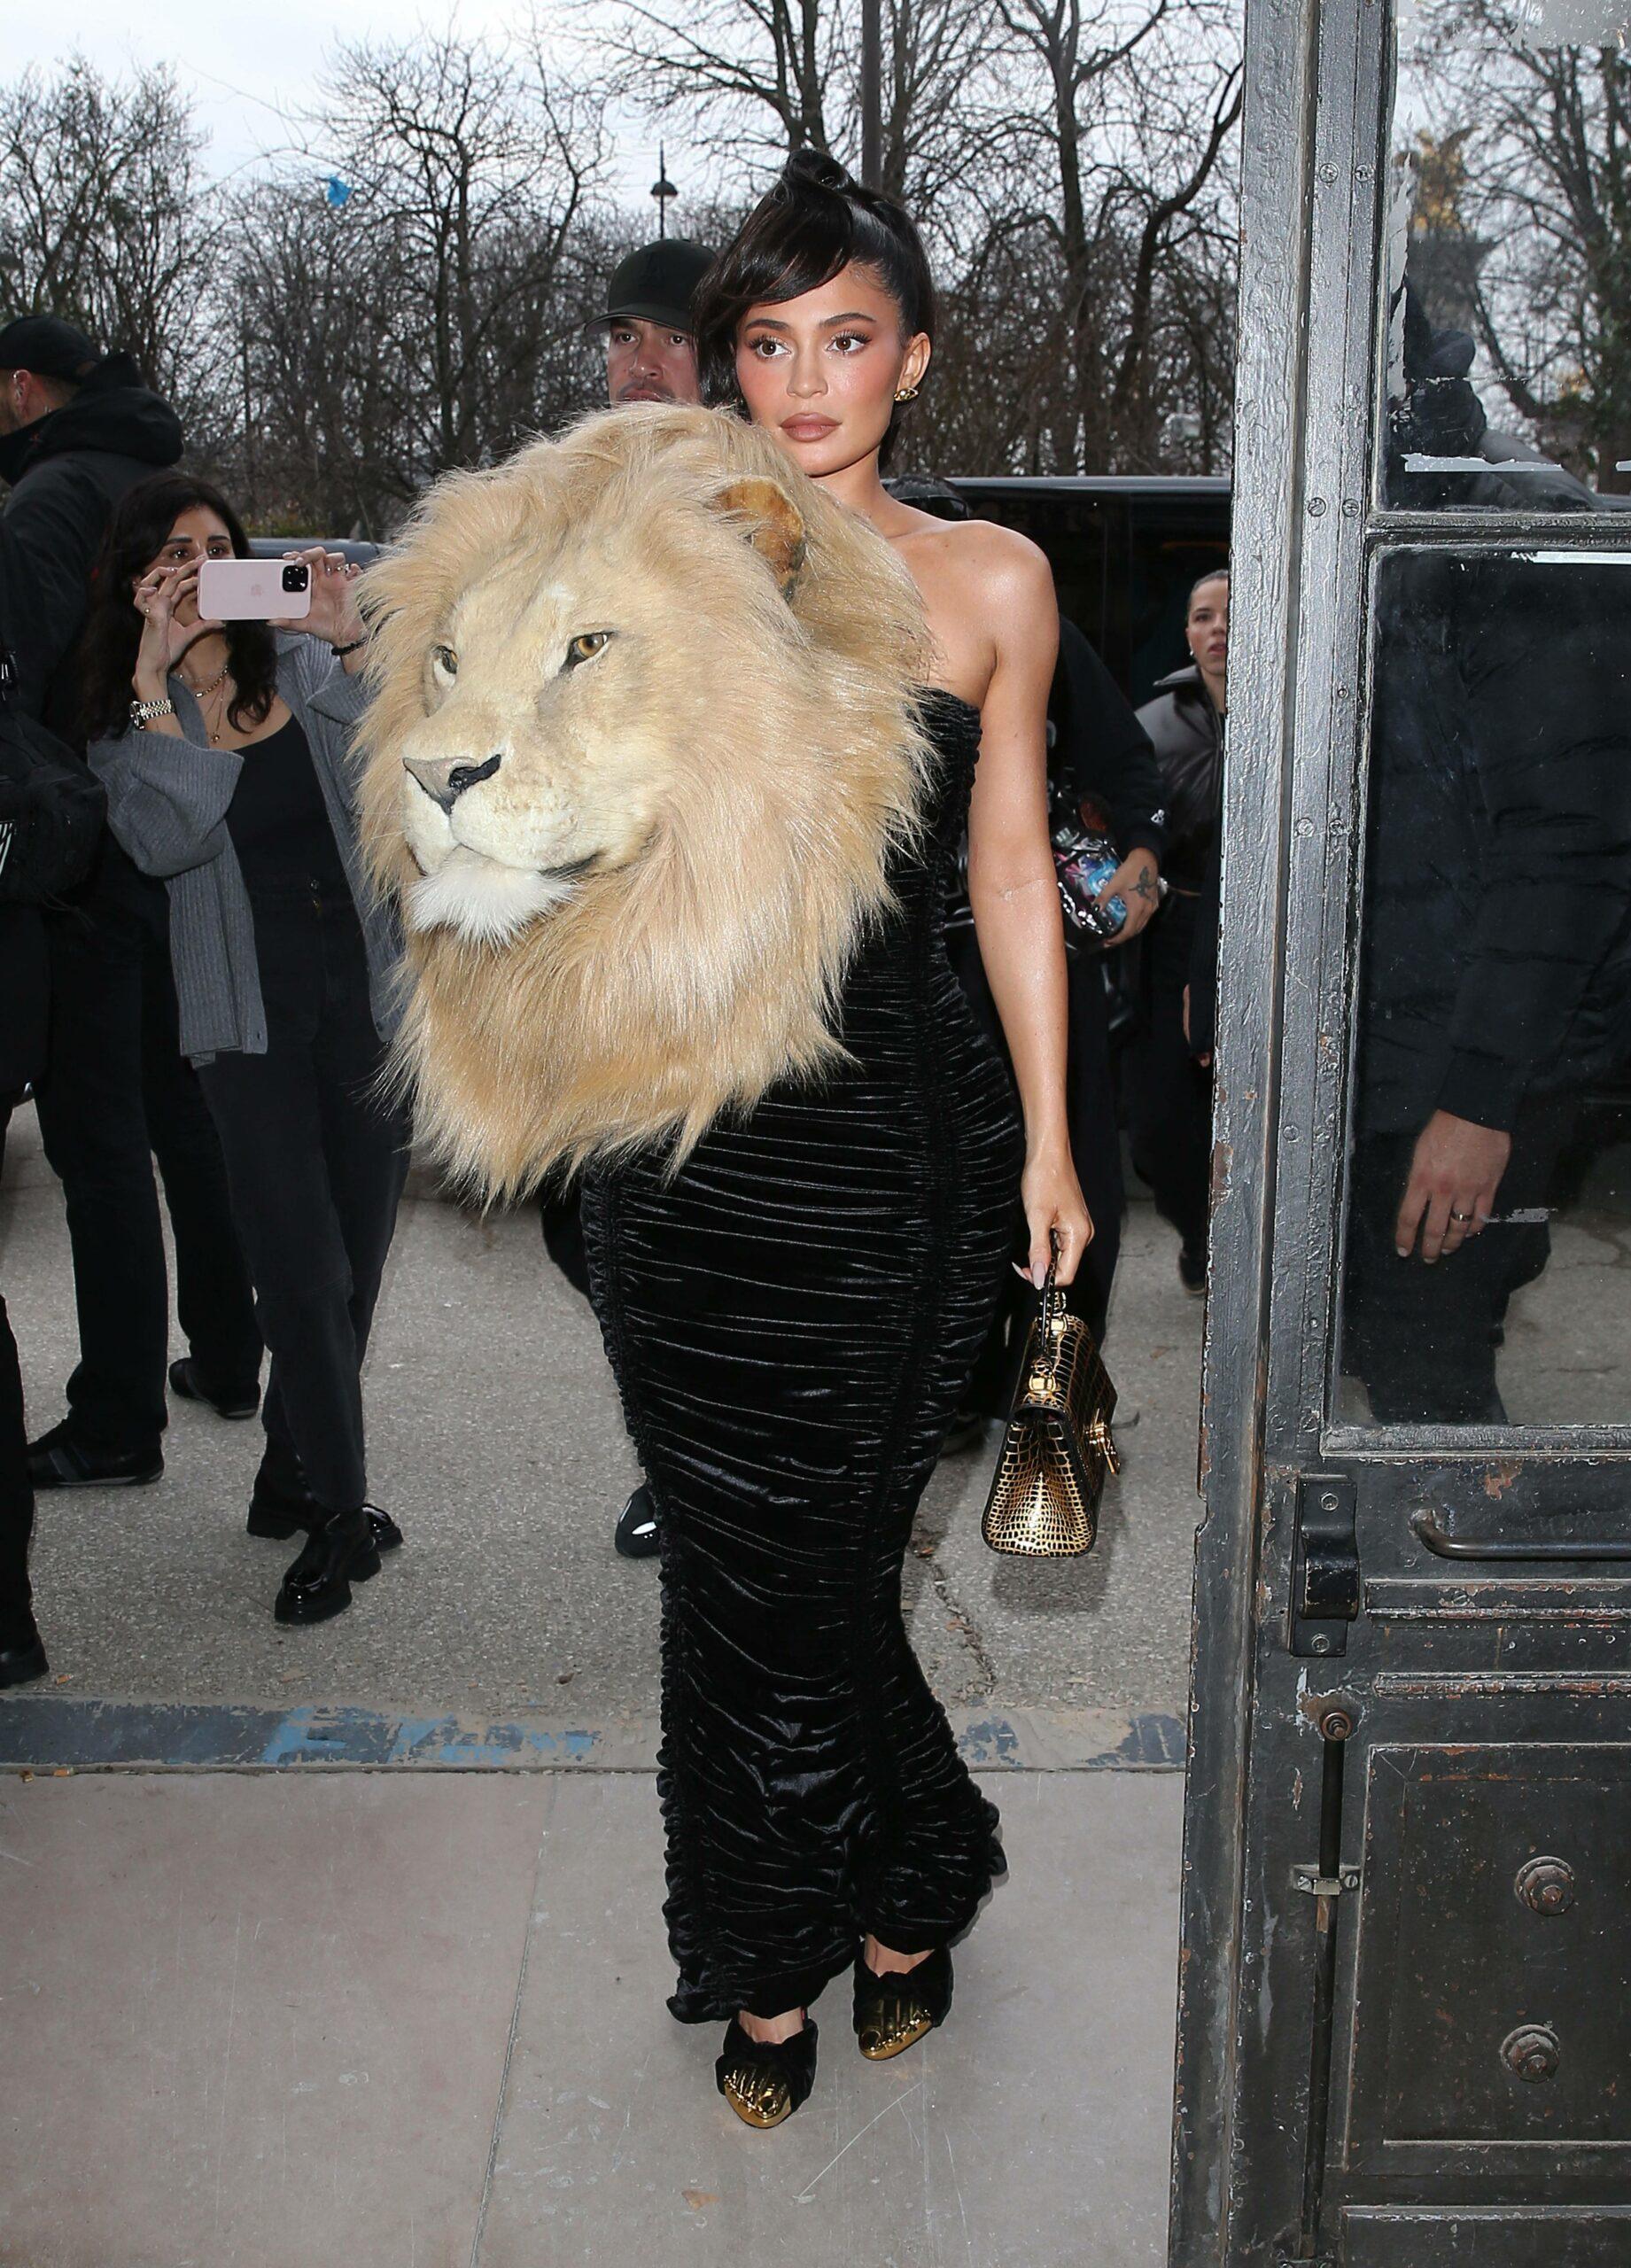 Kylie Jenner Stuns in a black dress with a hand made Lion's Head on the front at the Schiapparelli fashion show in Paris, France